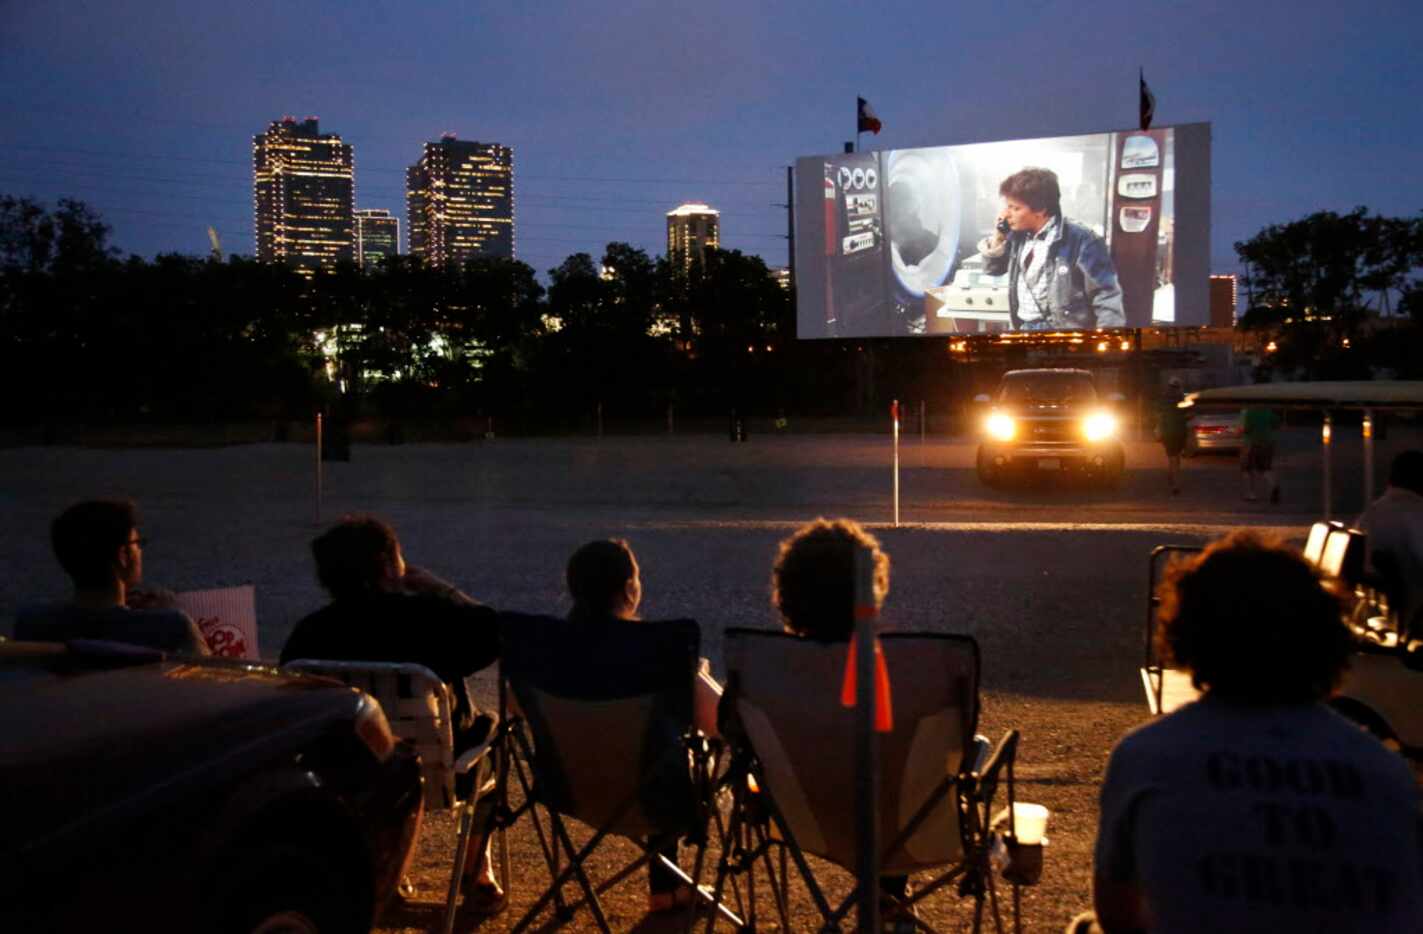 There's plenty of fun in Fort Worth, including the Coyote Drive-In movie theater.